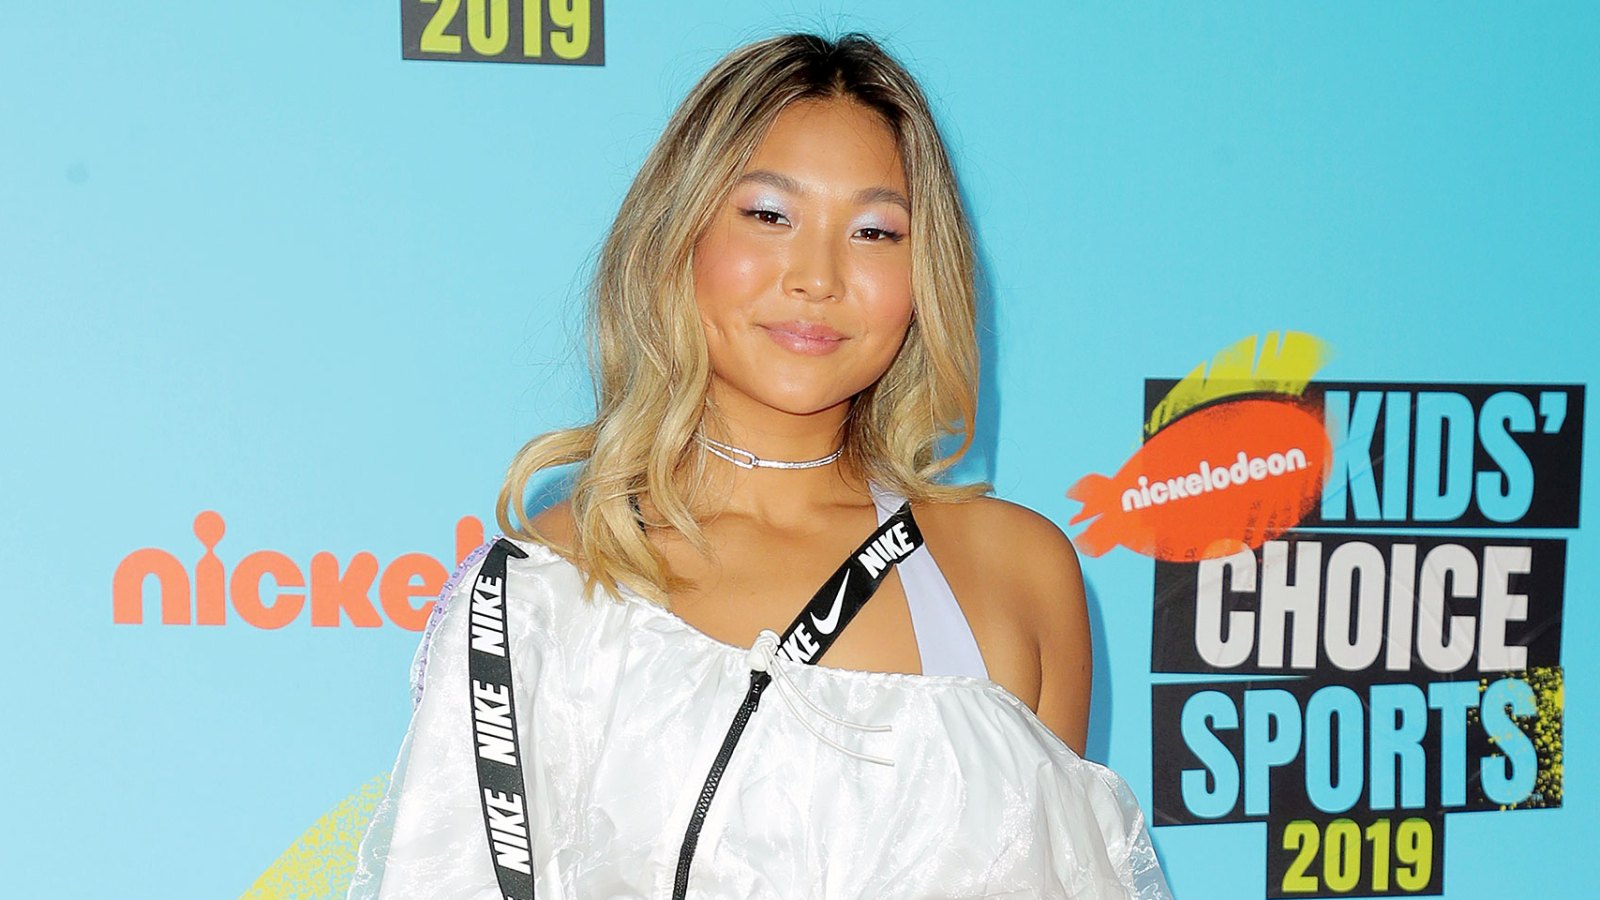 Olympian Chloe Kim Says She Took a Break From Snowboarding to Find the Other Part of Herself While Away at College